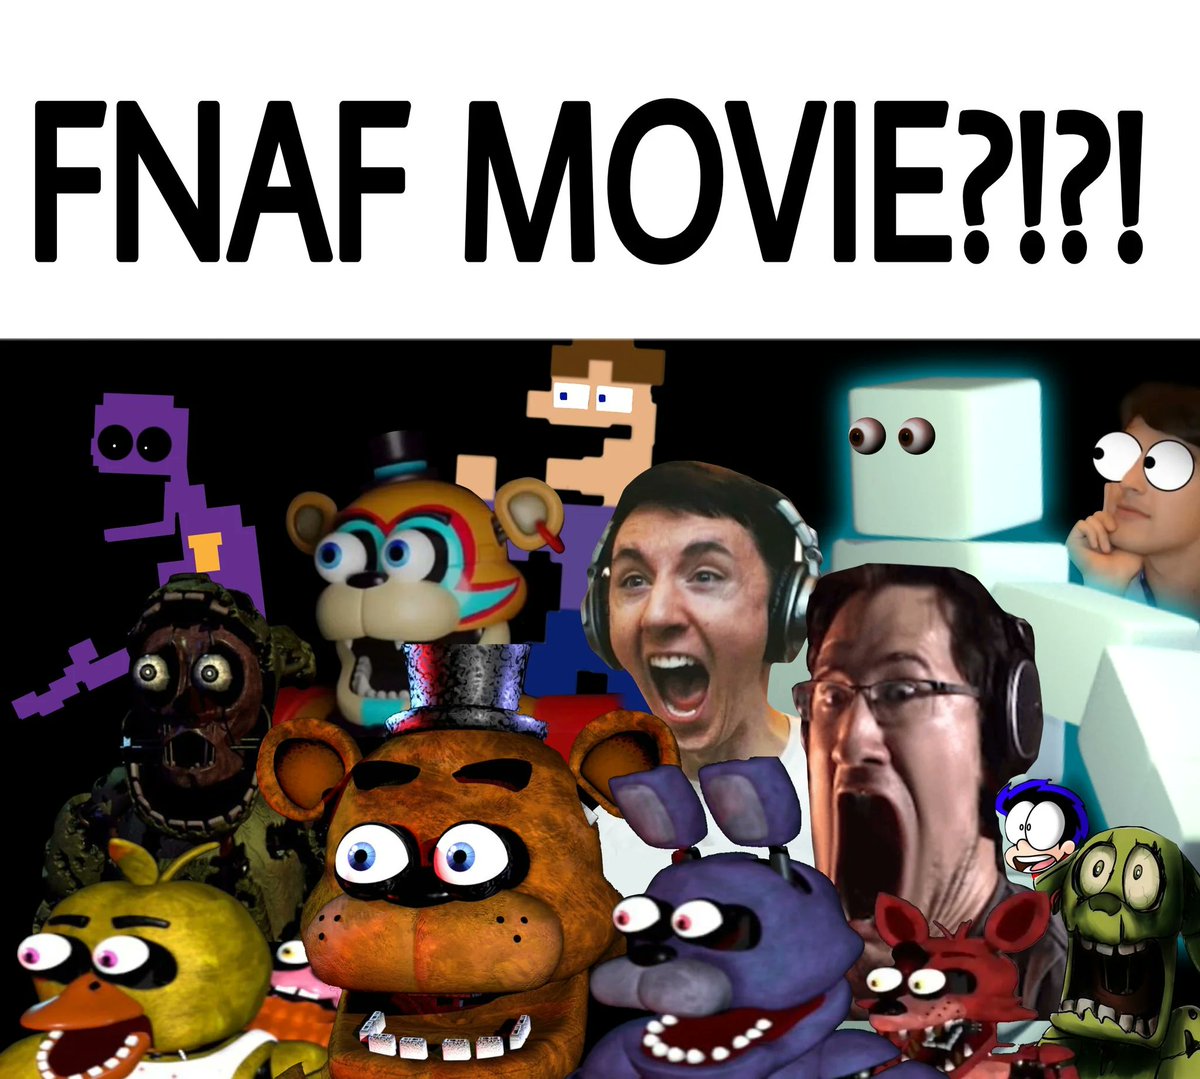 ENDERTRAP CO. on X: Alright FNAF FANS, When the rotten tomato embargo  lifts we HAVE TO give the #FNAFMovie a 5 star audience score. Critics are  going to hate it, audiences and